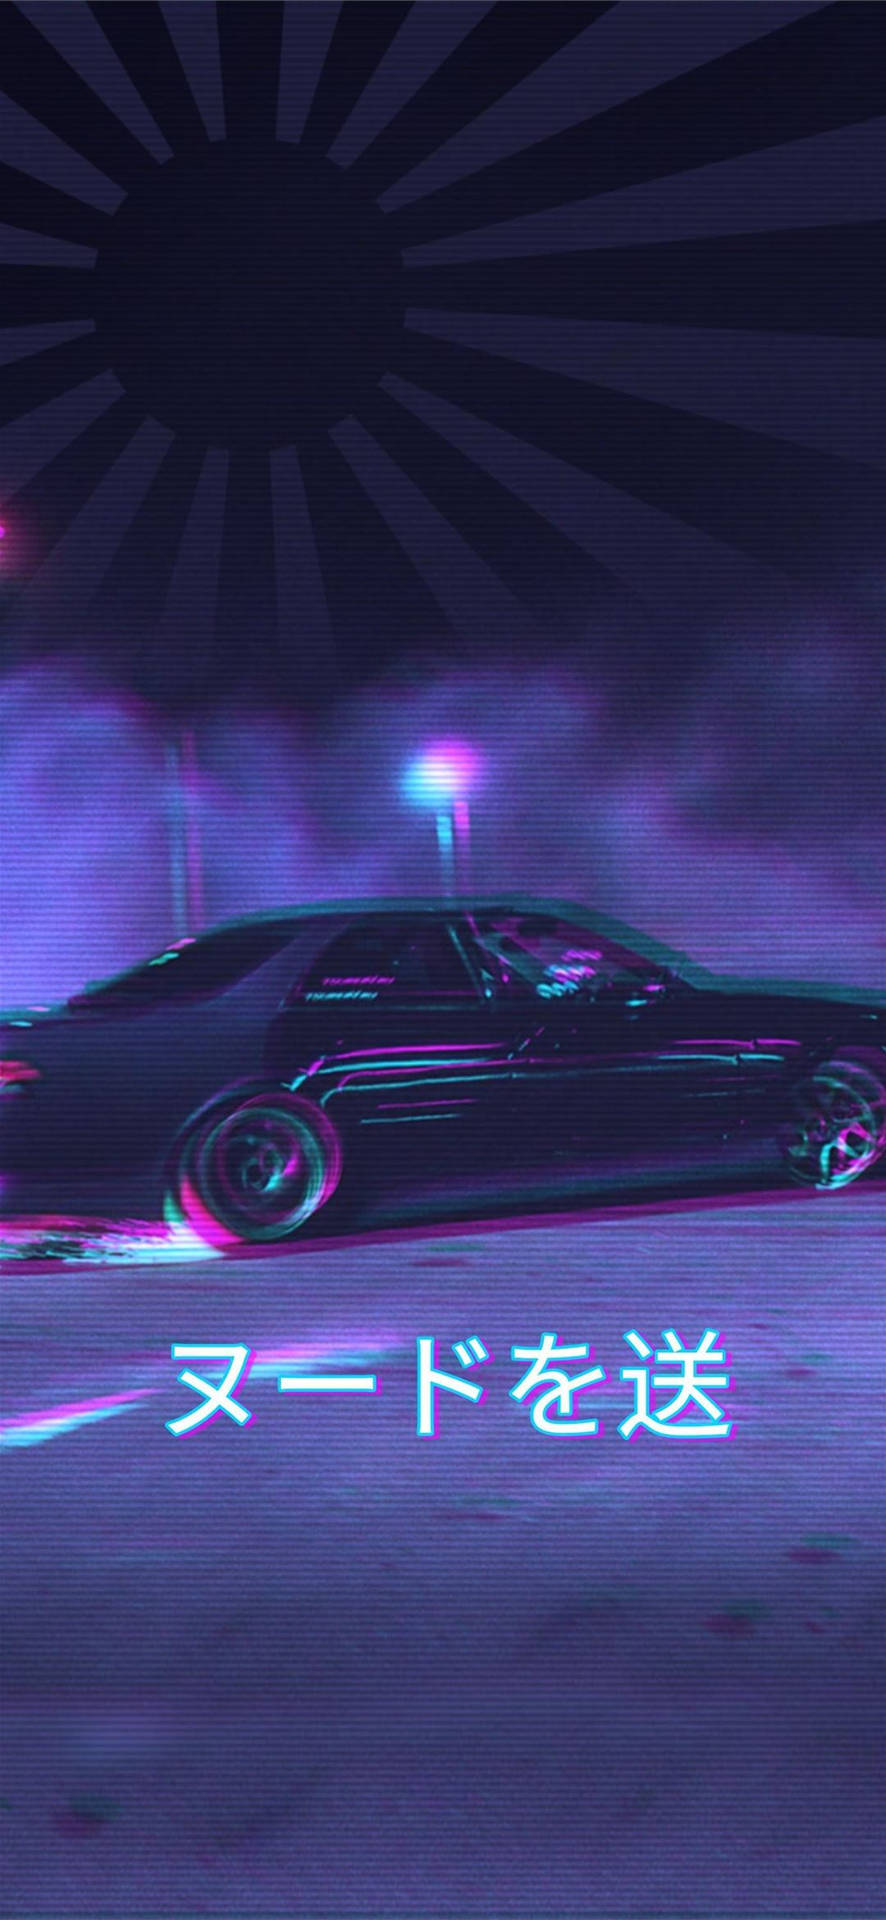 Classic Jdm Aesthetic With Flag